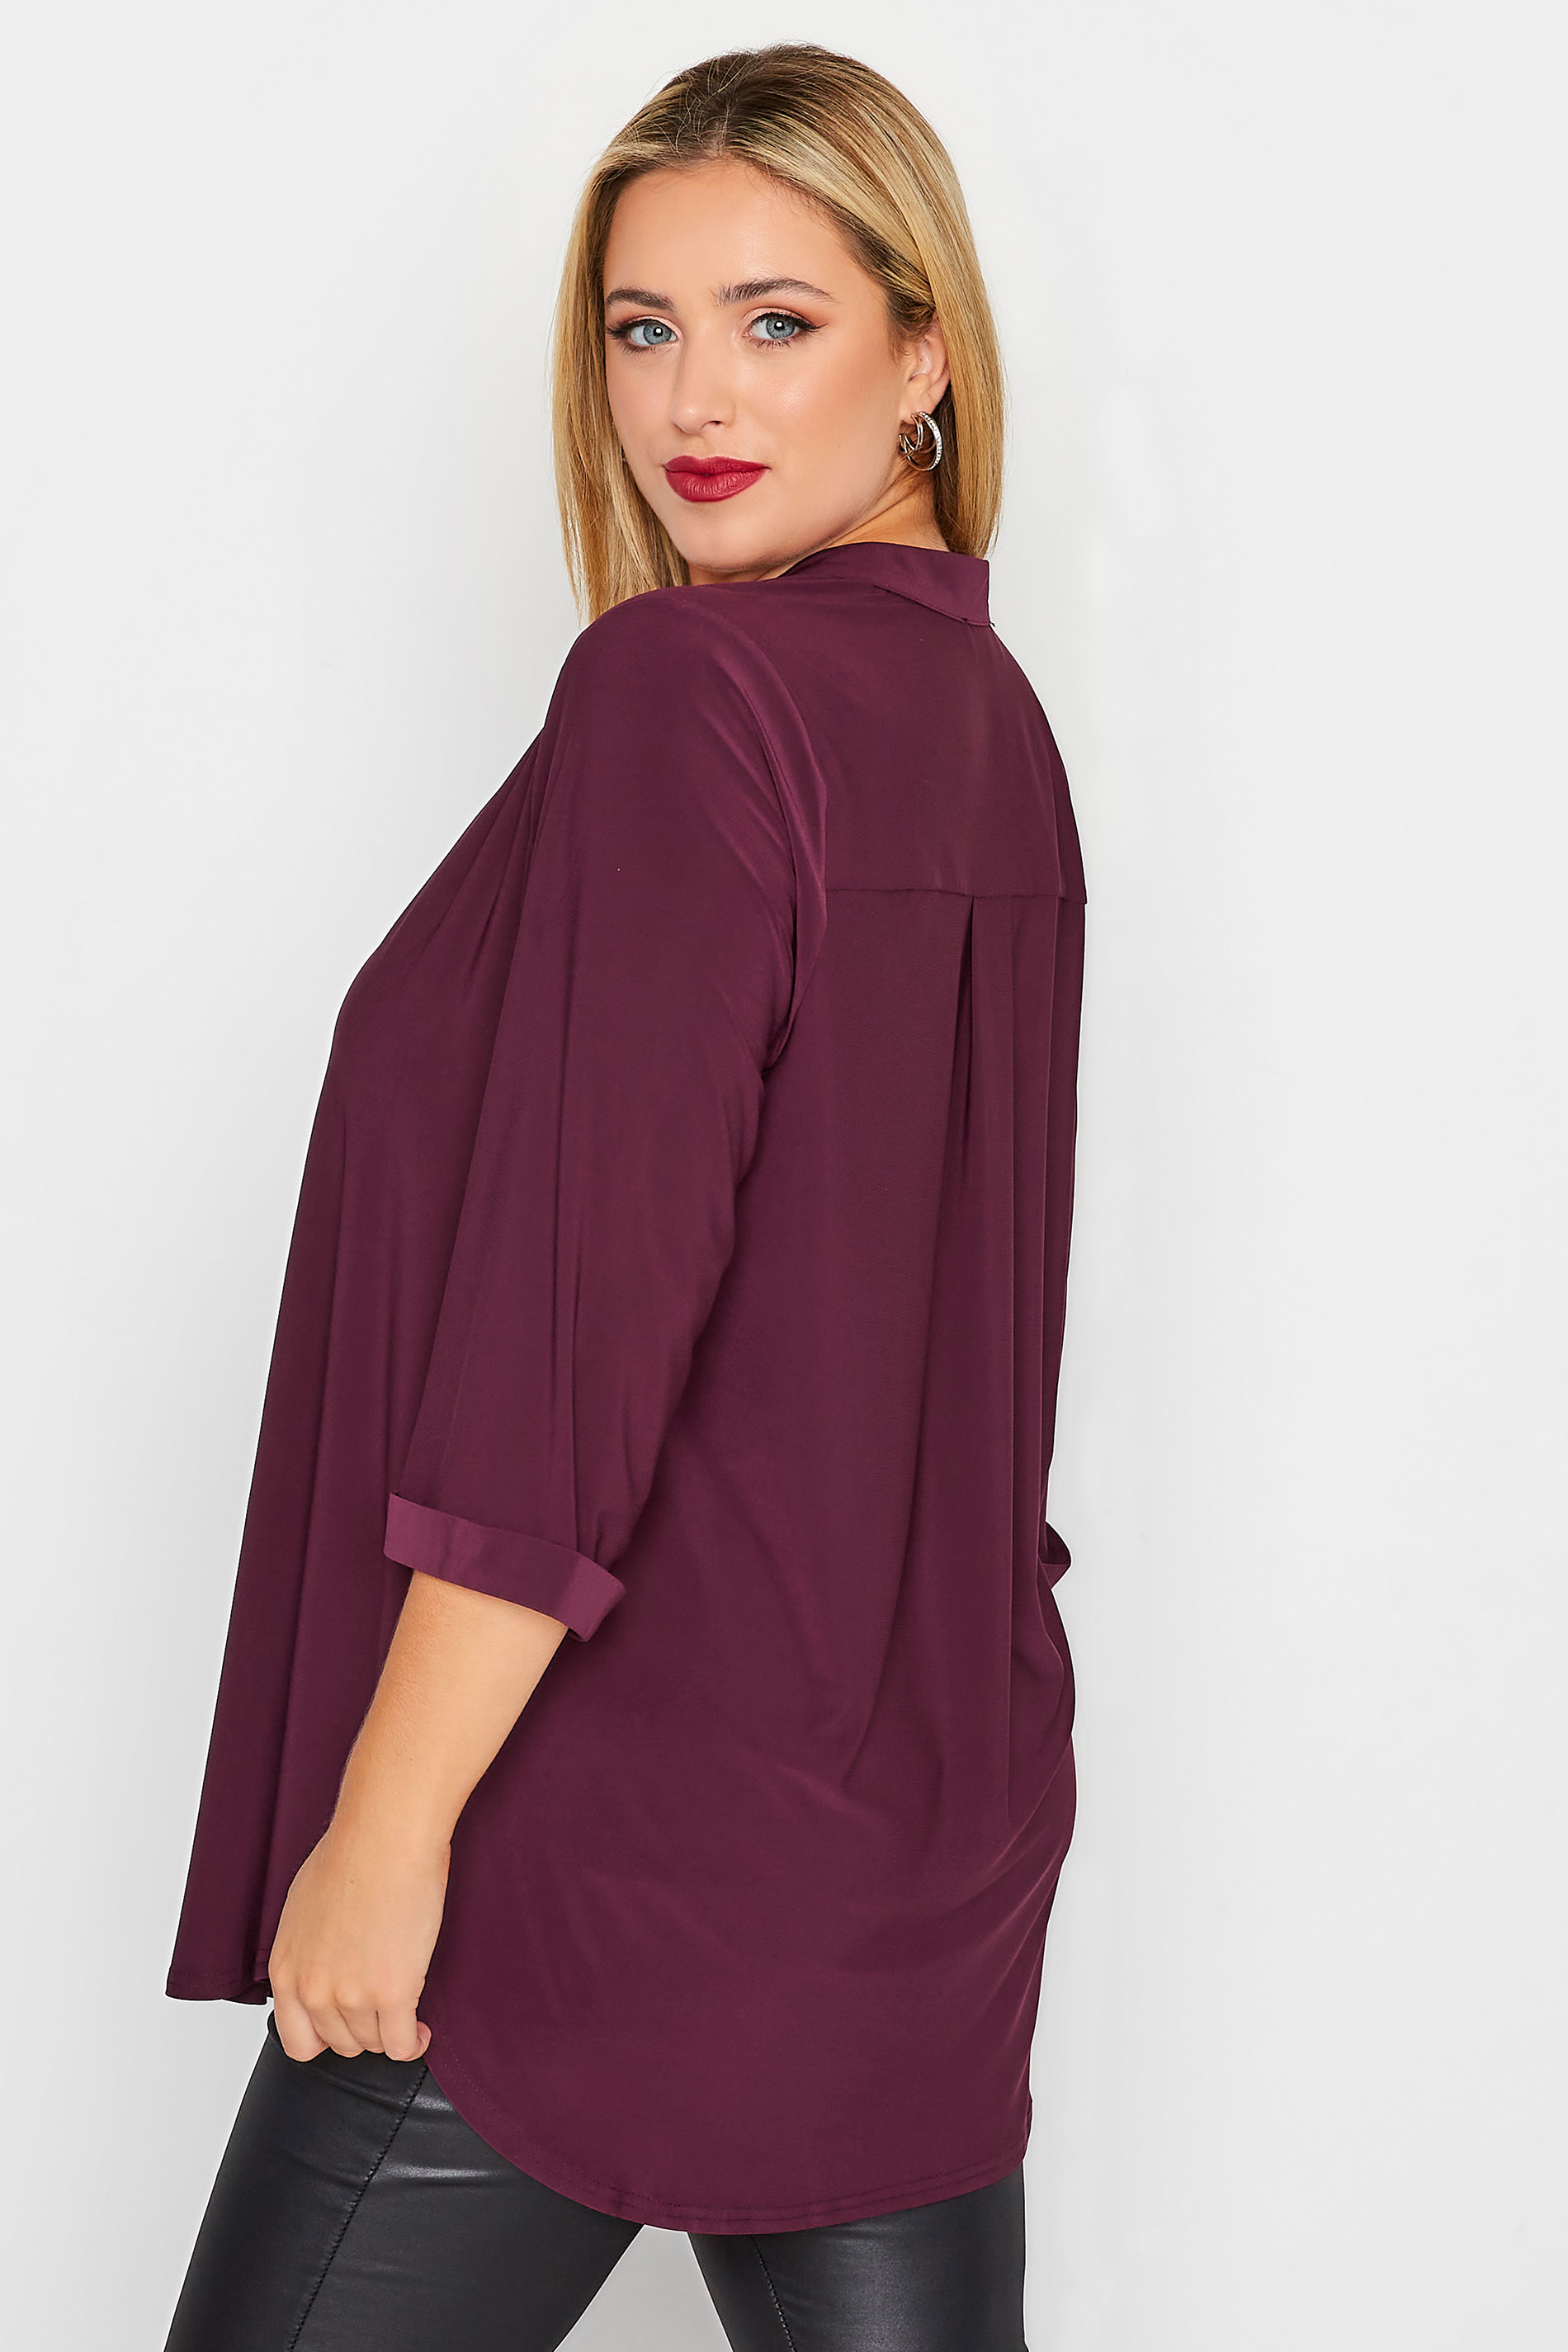 YOURS LONDON Plus Size Burgundy Red Half Placket Shirt | Yours Clothing 3